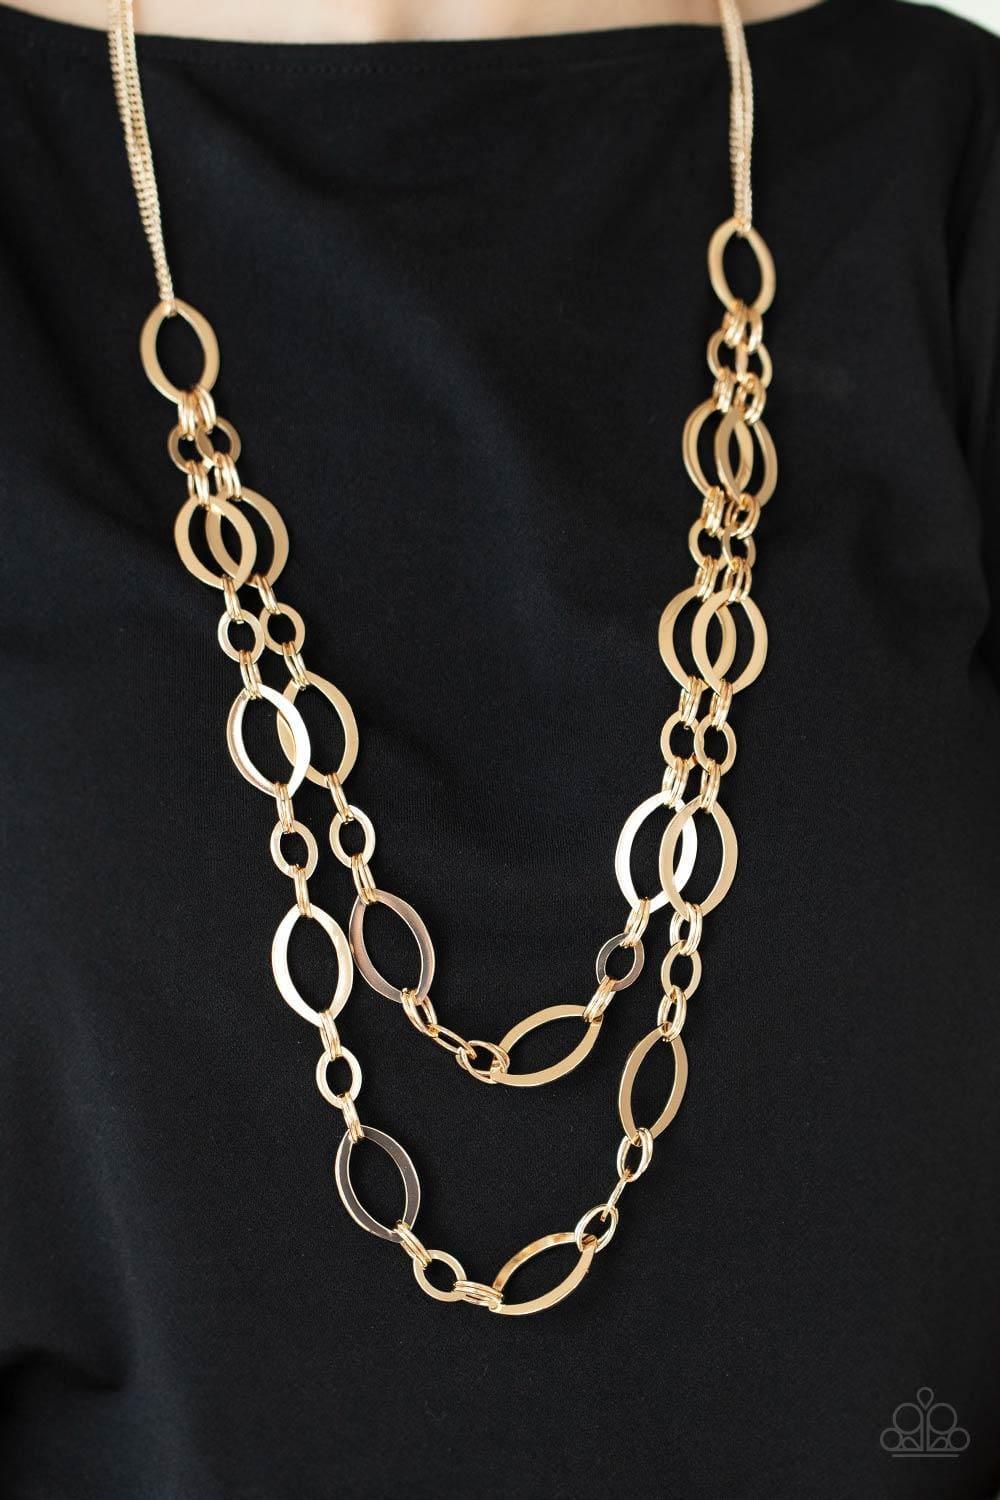 Paparazzi Accessories - The Oval-achiever - Gold Necklace - Bling by JessieK